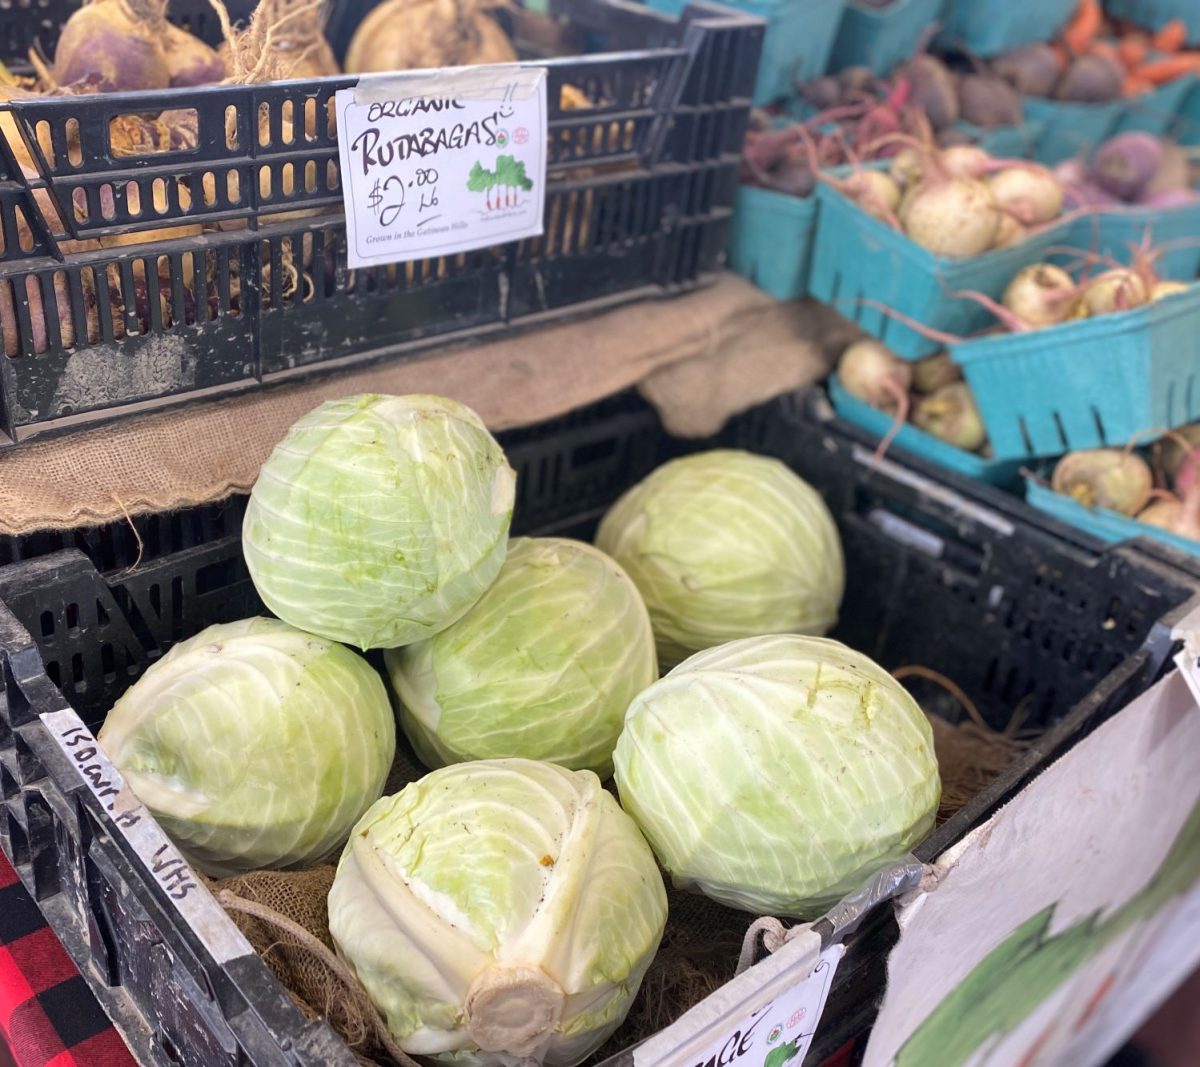 Baskets of cabbage, rutabagas, and other vegetables on a table at a farmers' market.